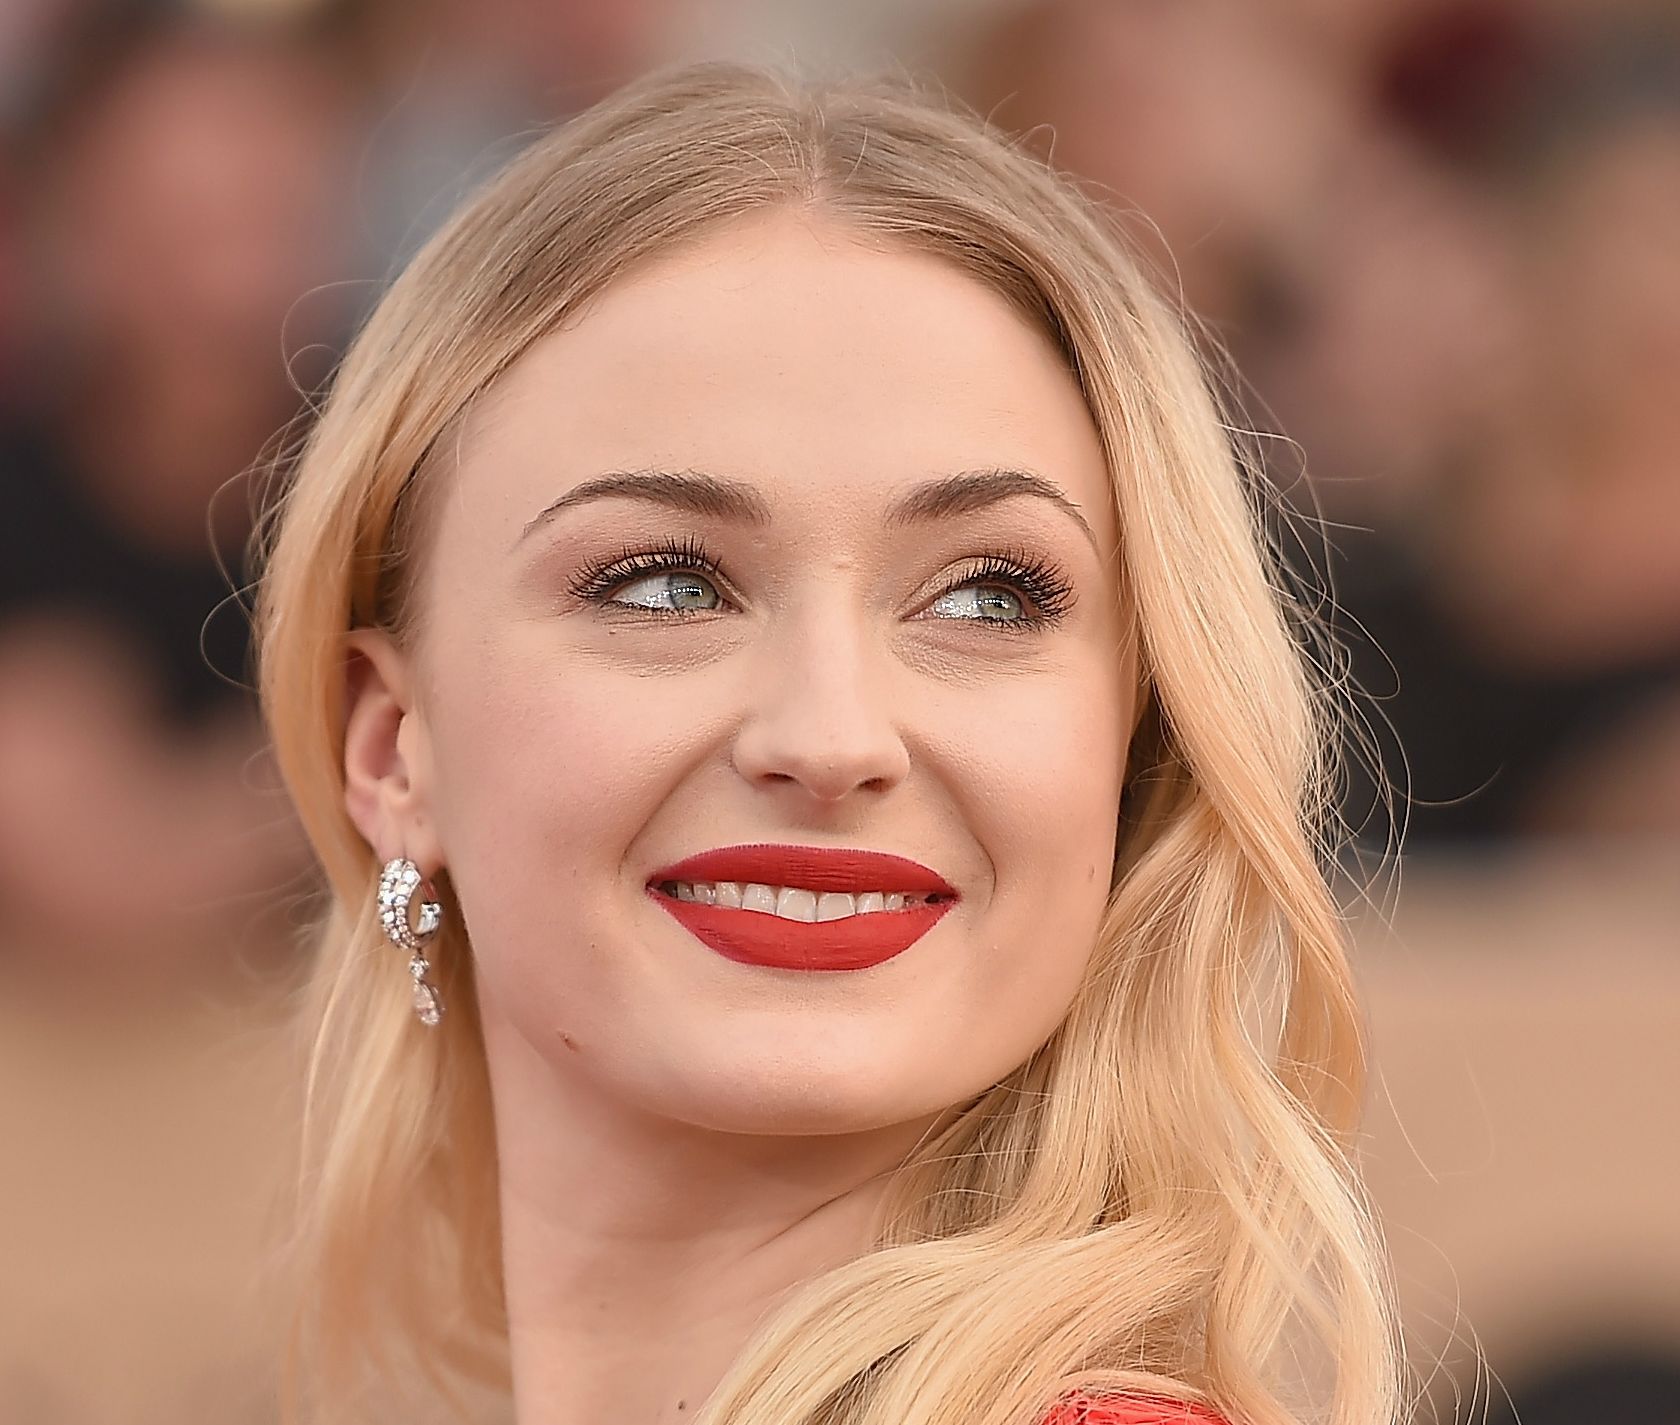 Sophie Turner Heard About Oral Sex From Game of Thrones